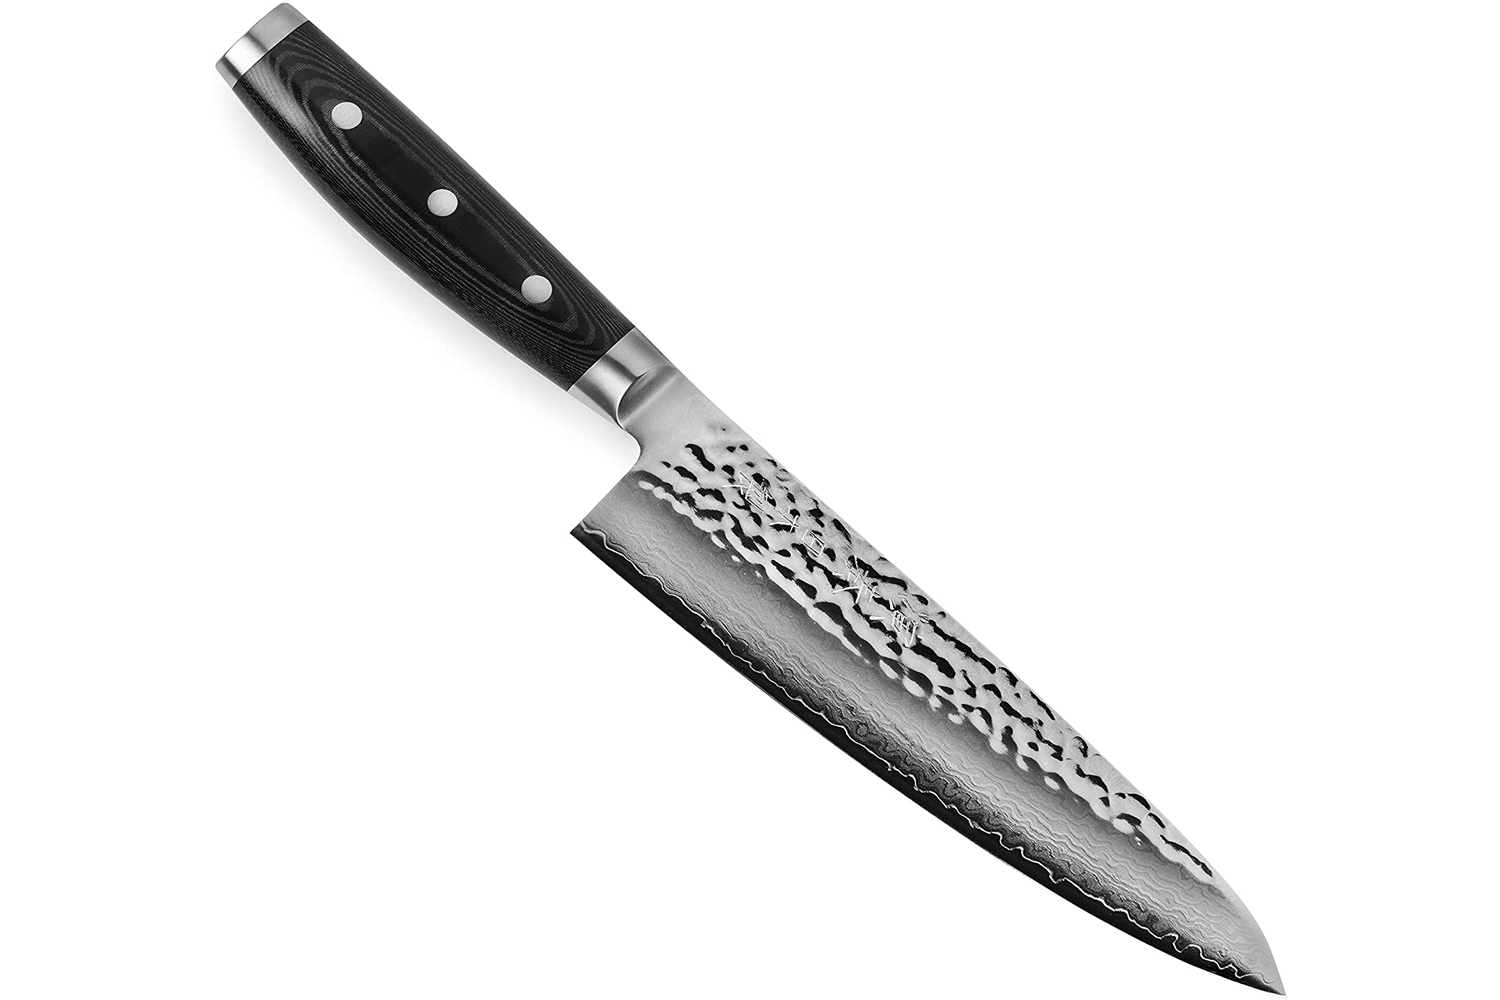 https://www.themanual.com/wp-content/uploads/sites/9/2021/01/enso-chefs-knife.jpg?fit=800%2C800&p=1